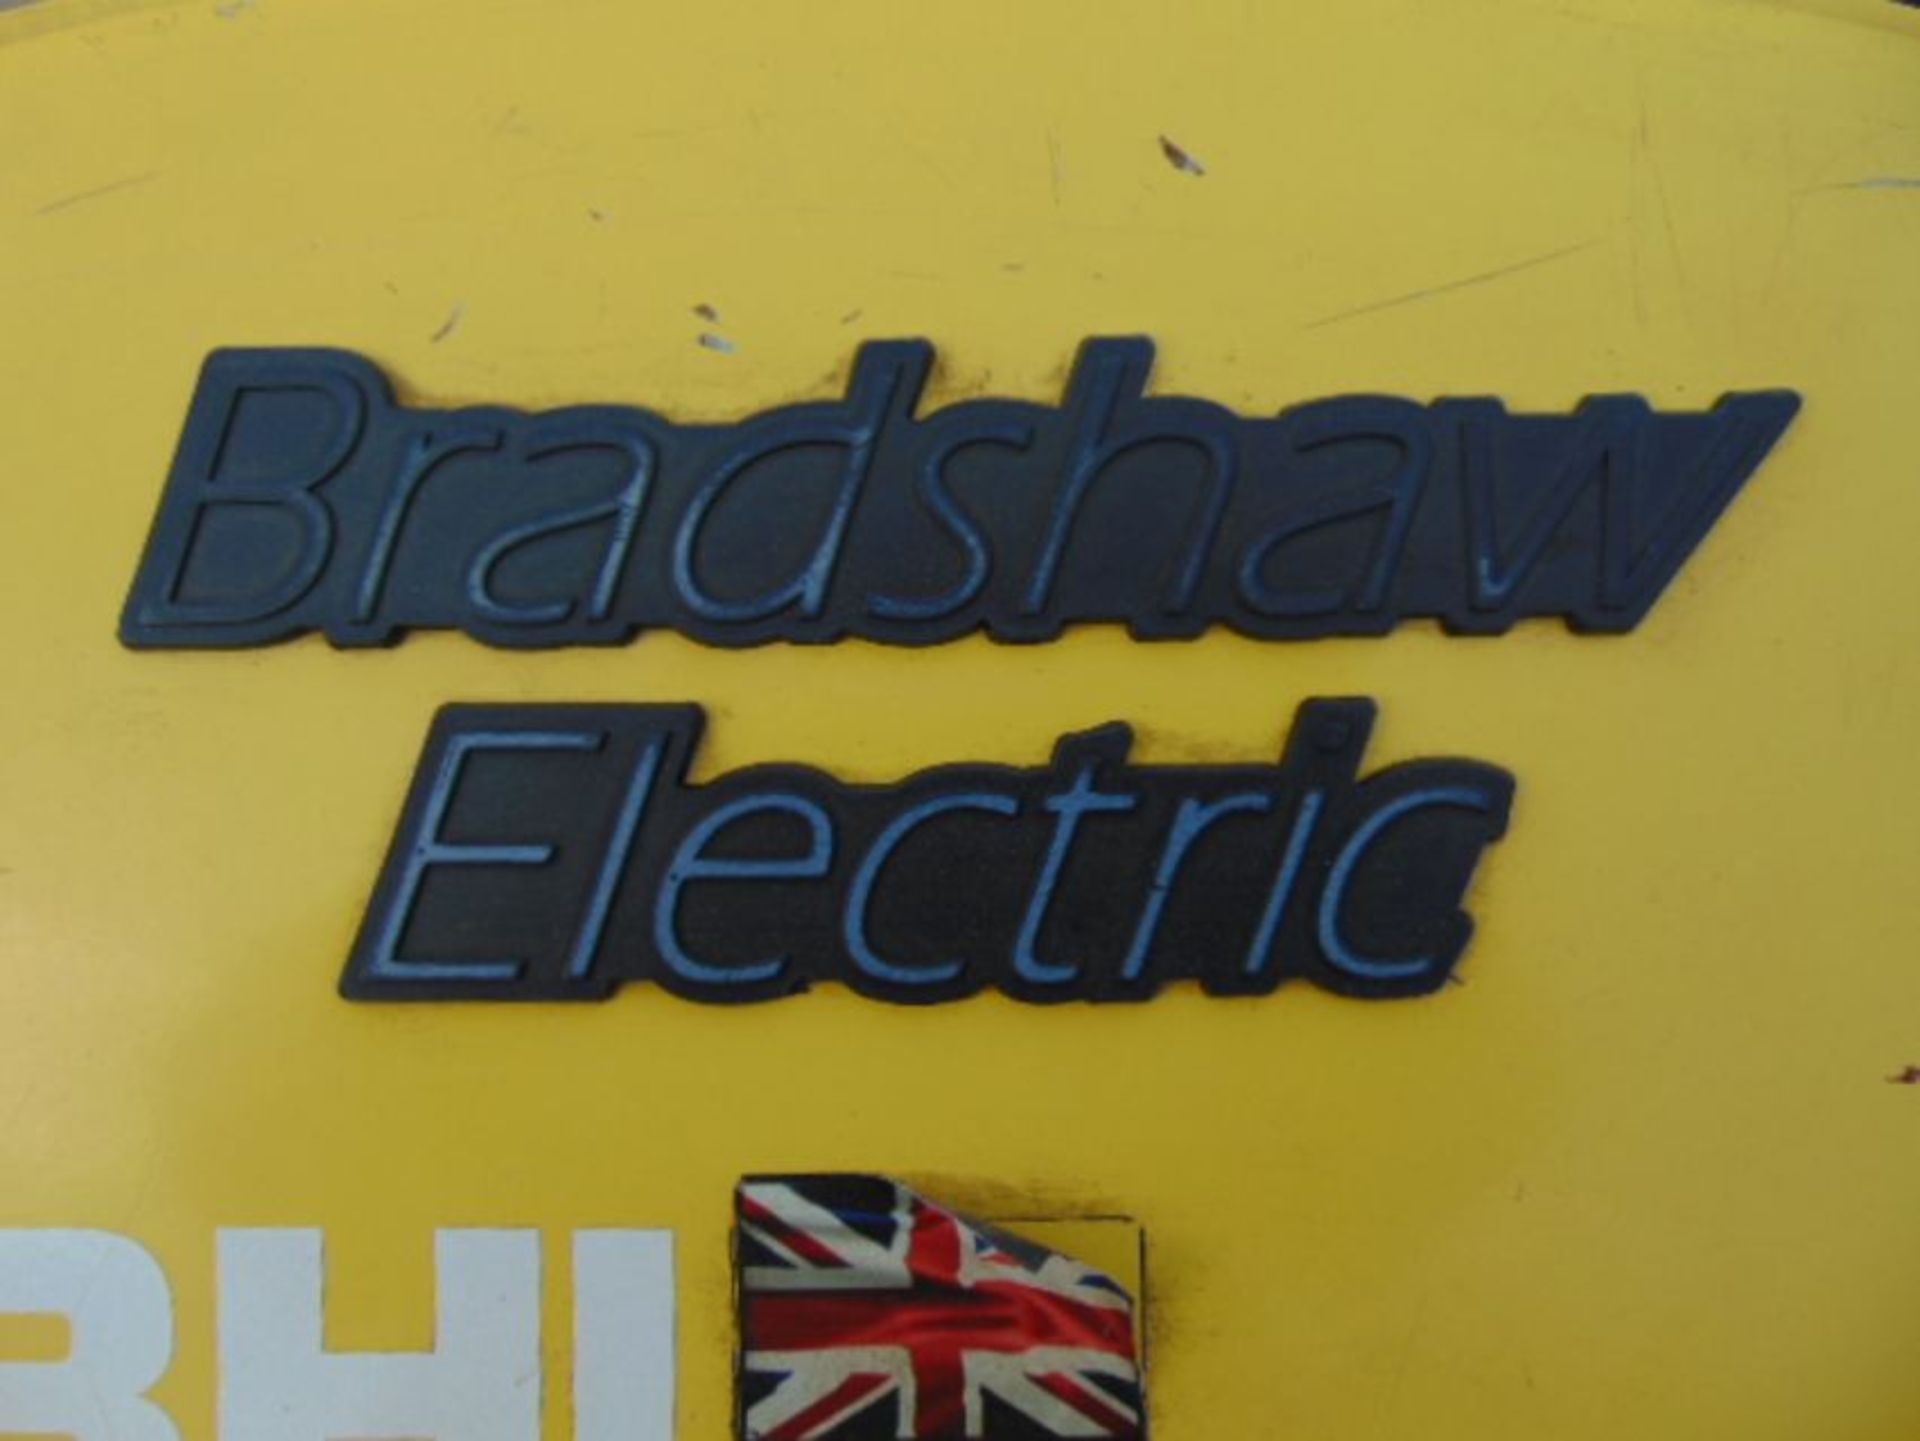 2010 Bradshaw T5 5000Kg Electric Tow Tractor c/w Battery Charger - Image 13 of 13